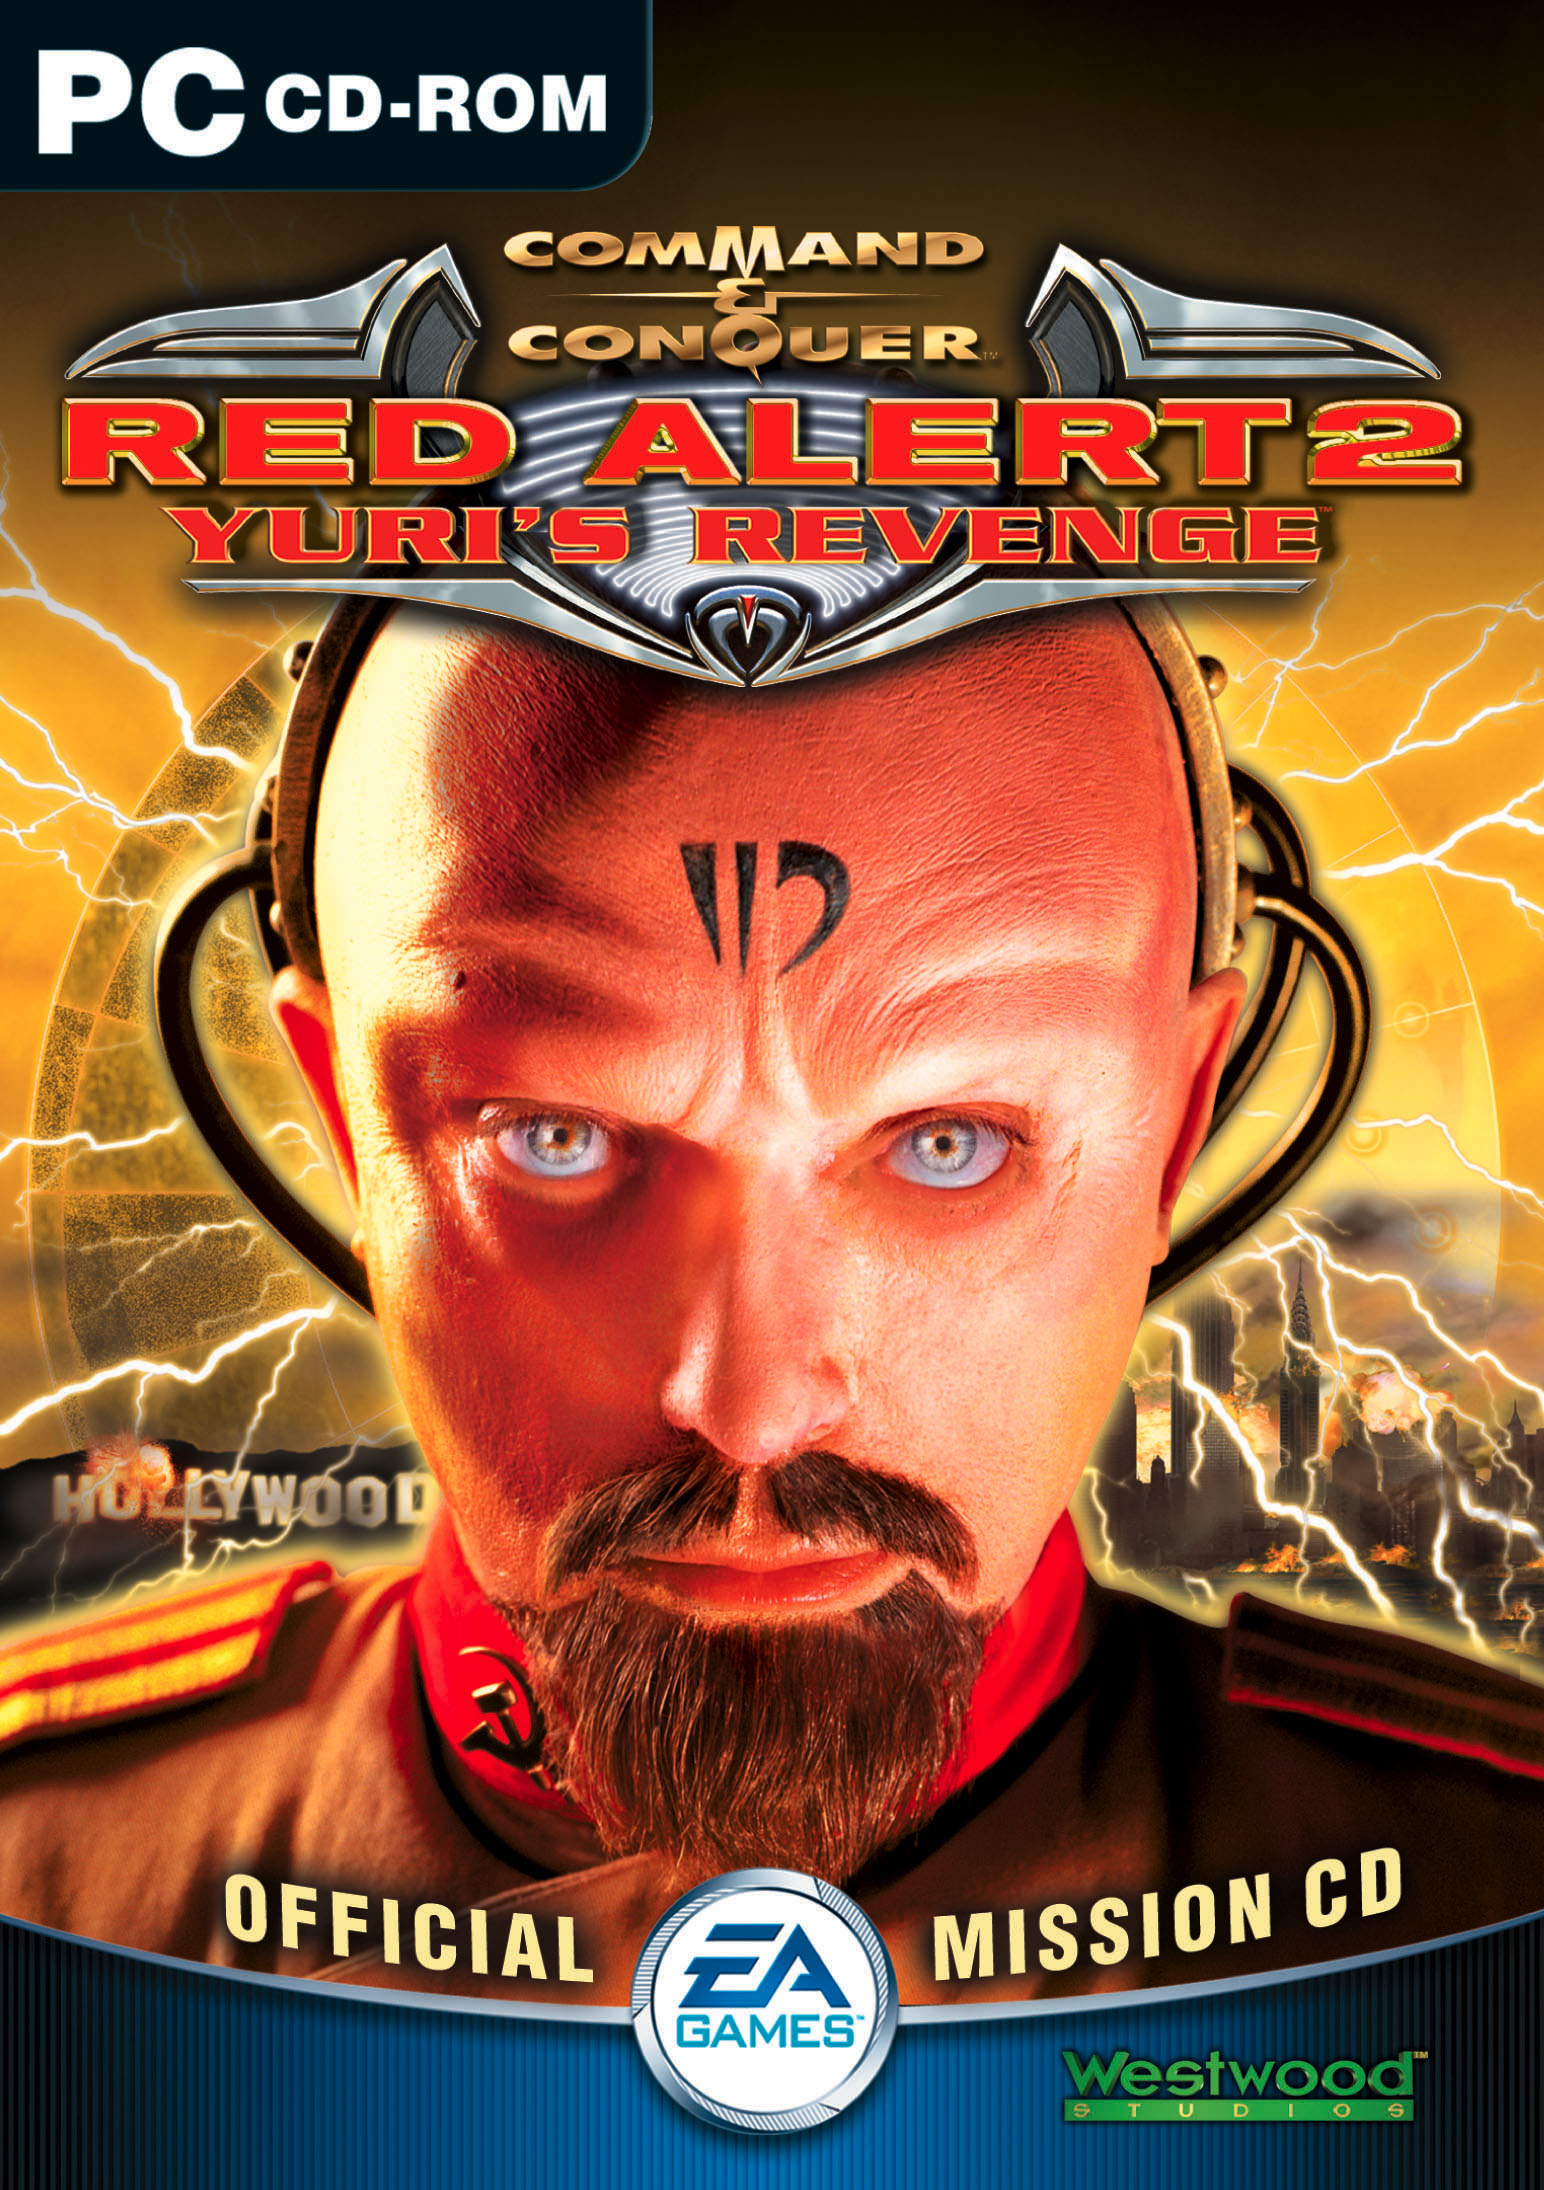 cannot install red alert 2